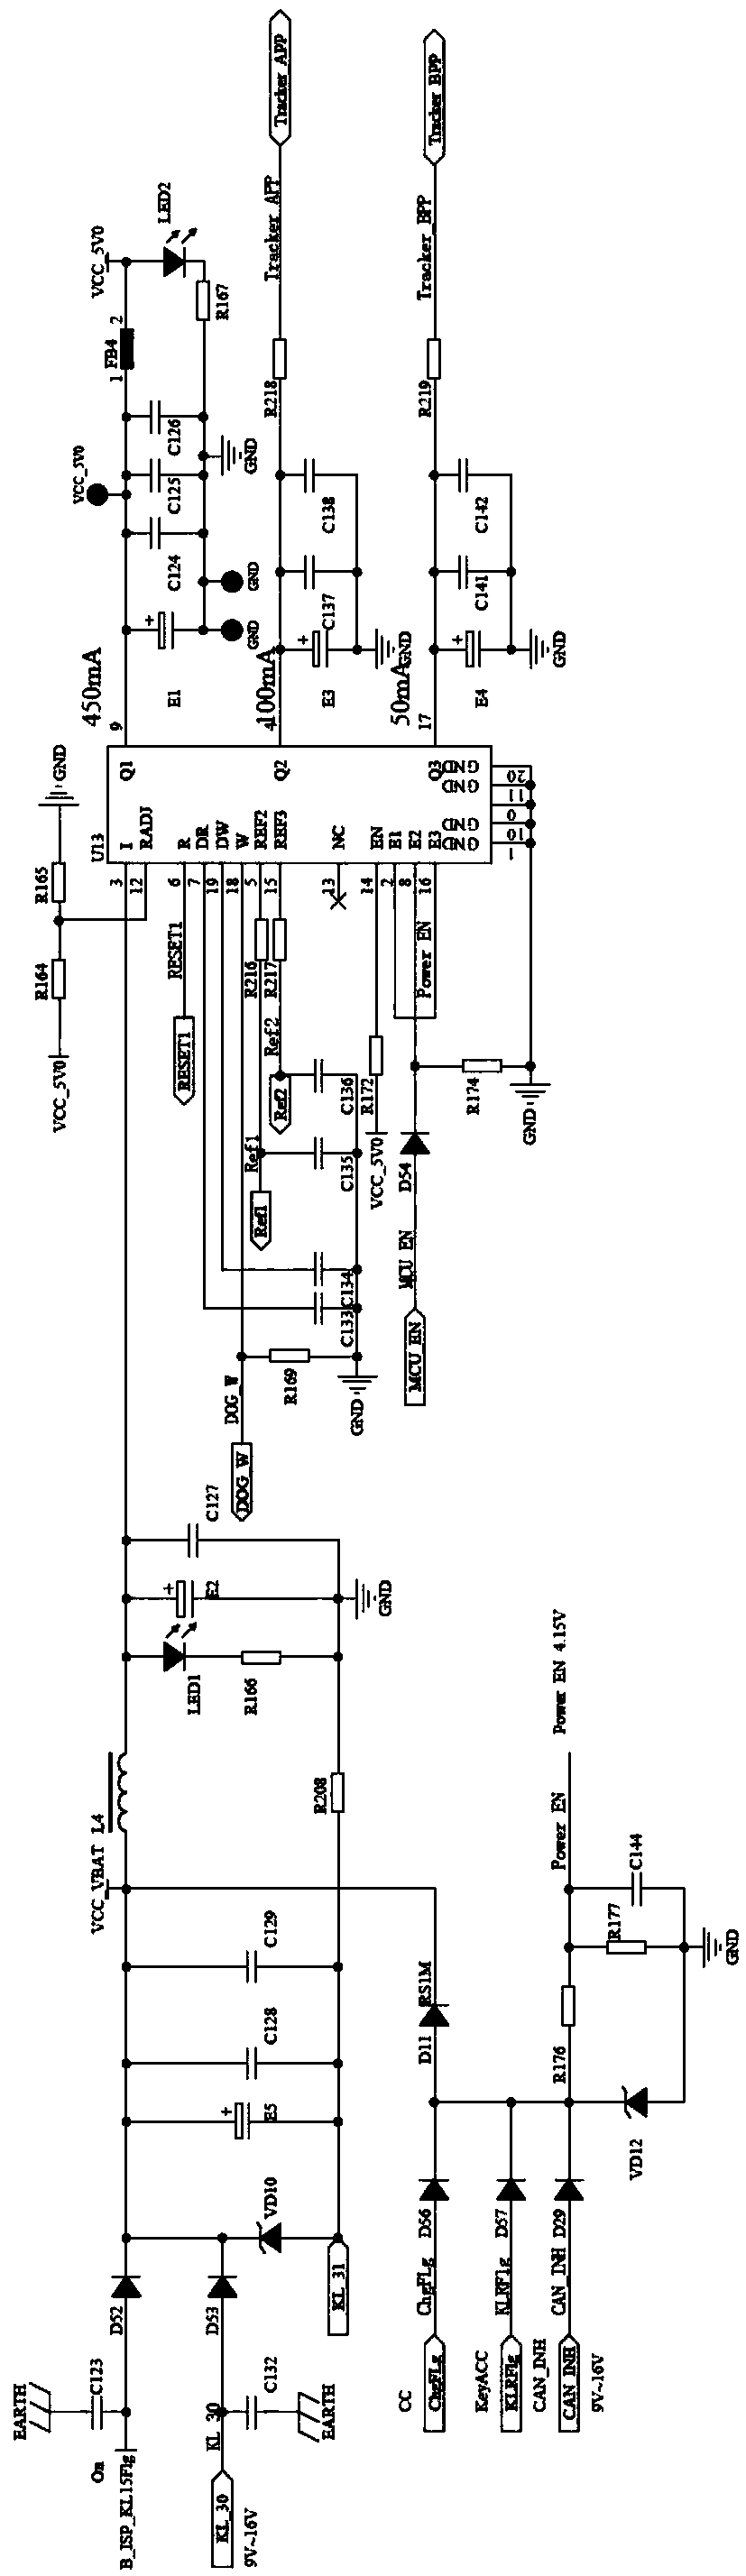 Low-power-consumption whole vehicle controller integrated with gateway function